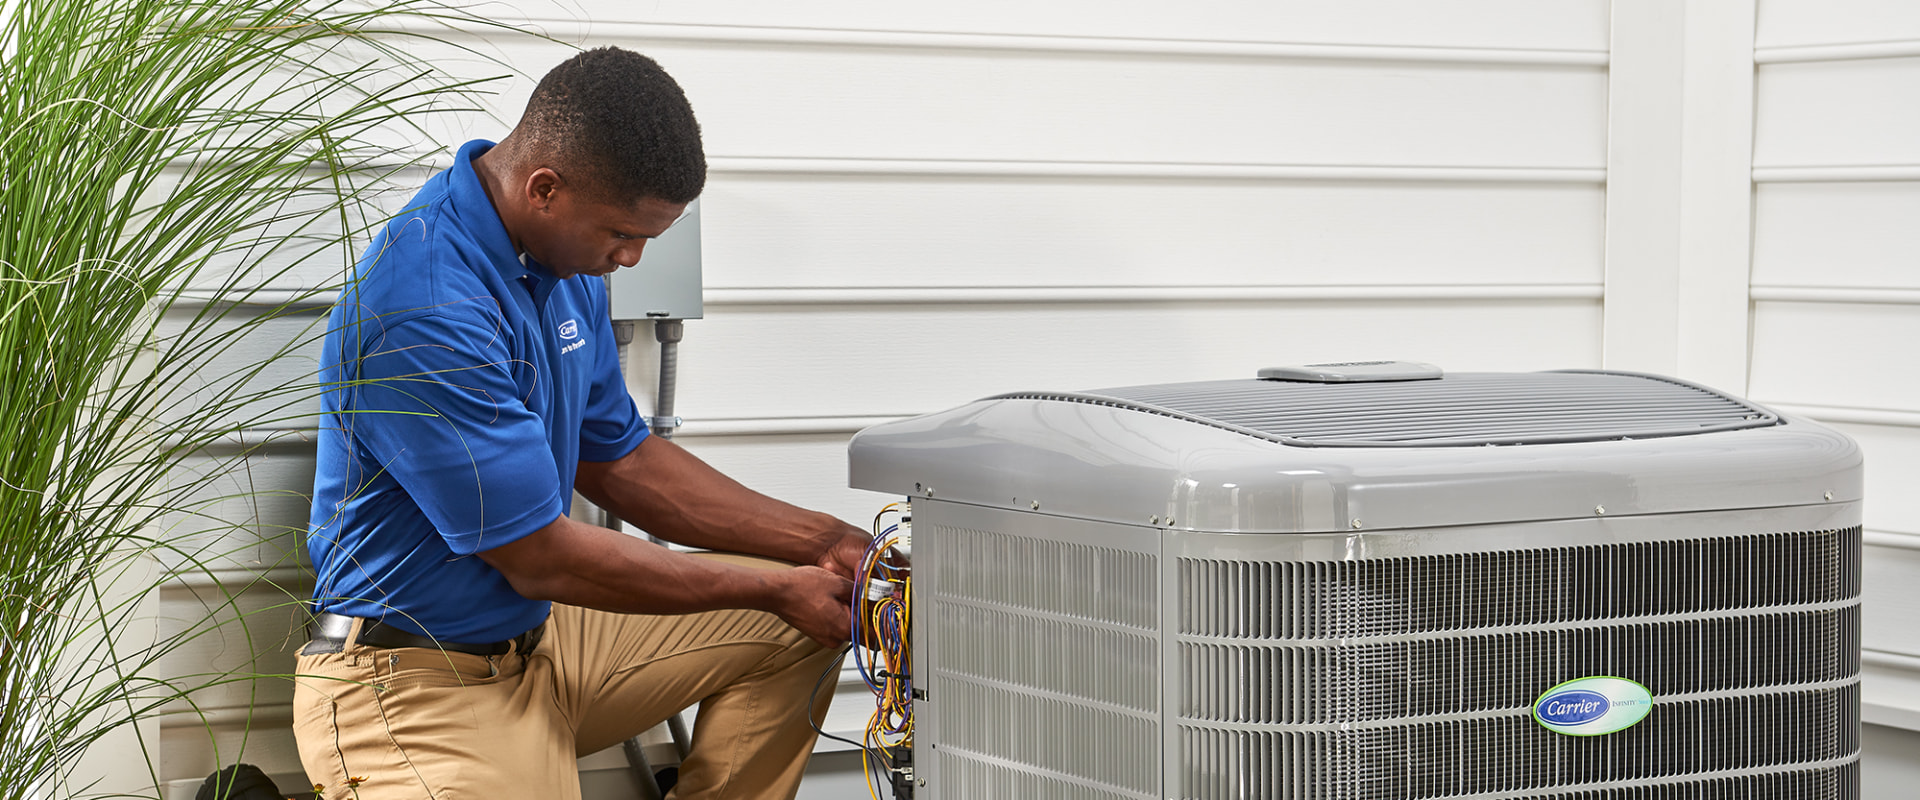 How Often Should You Service Your Air Conditioner for Optimal Performance?